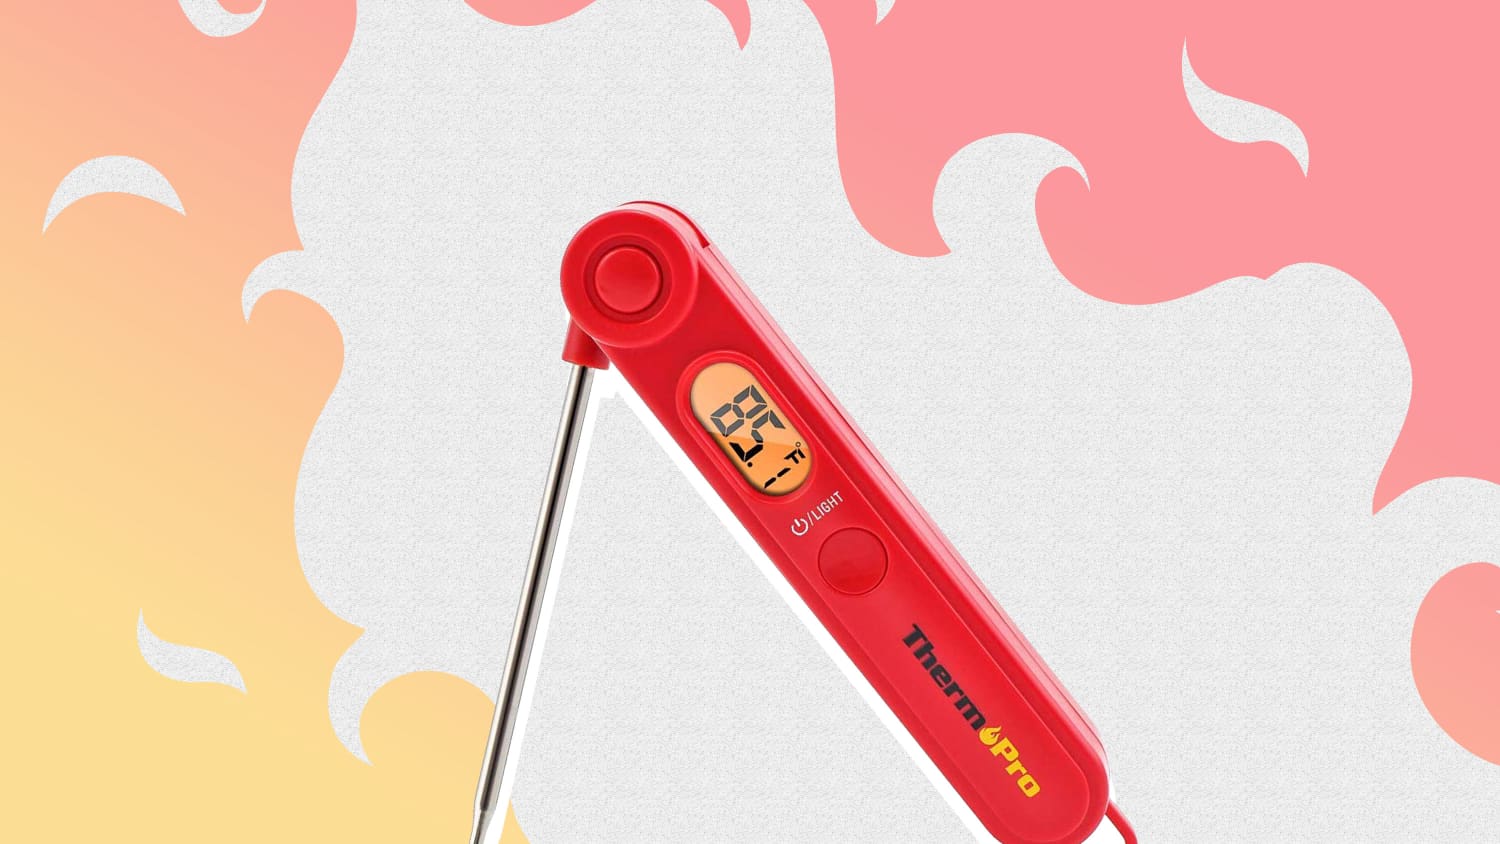 ThermoPro Instant Read Thermometer Tests 